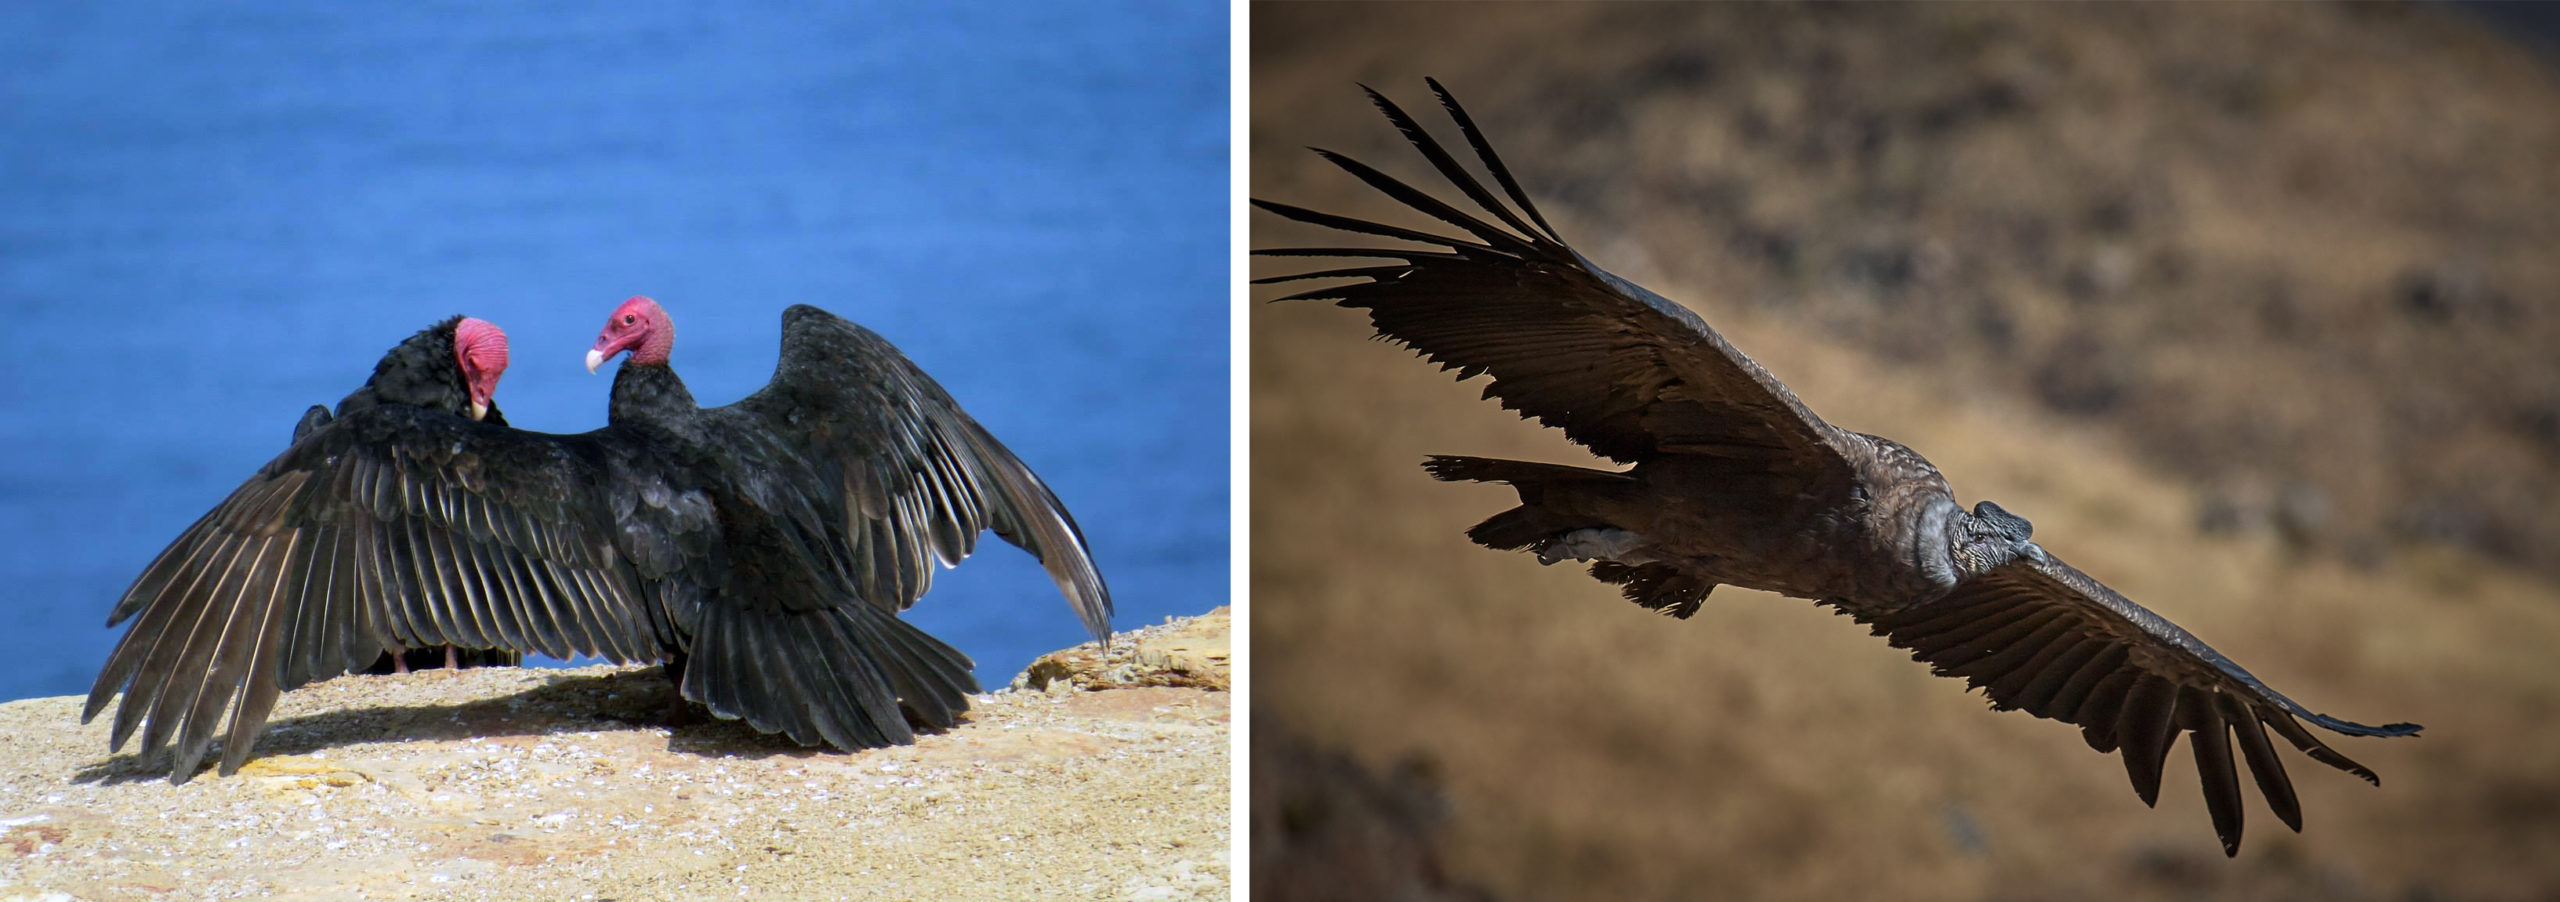 Left: Turkey vultures, Paracas Reserve, Peru (photo: Dr. Mary Brown, CC BY-NC-SA 2.0); Right: Andean condor, Arequipa, Peru (photo: Pedro Szekely, CC BY-SA 2.0) 